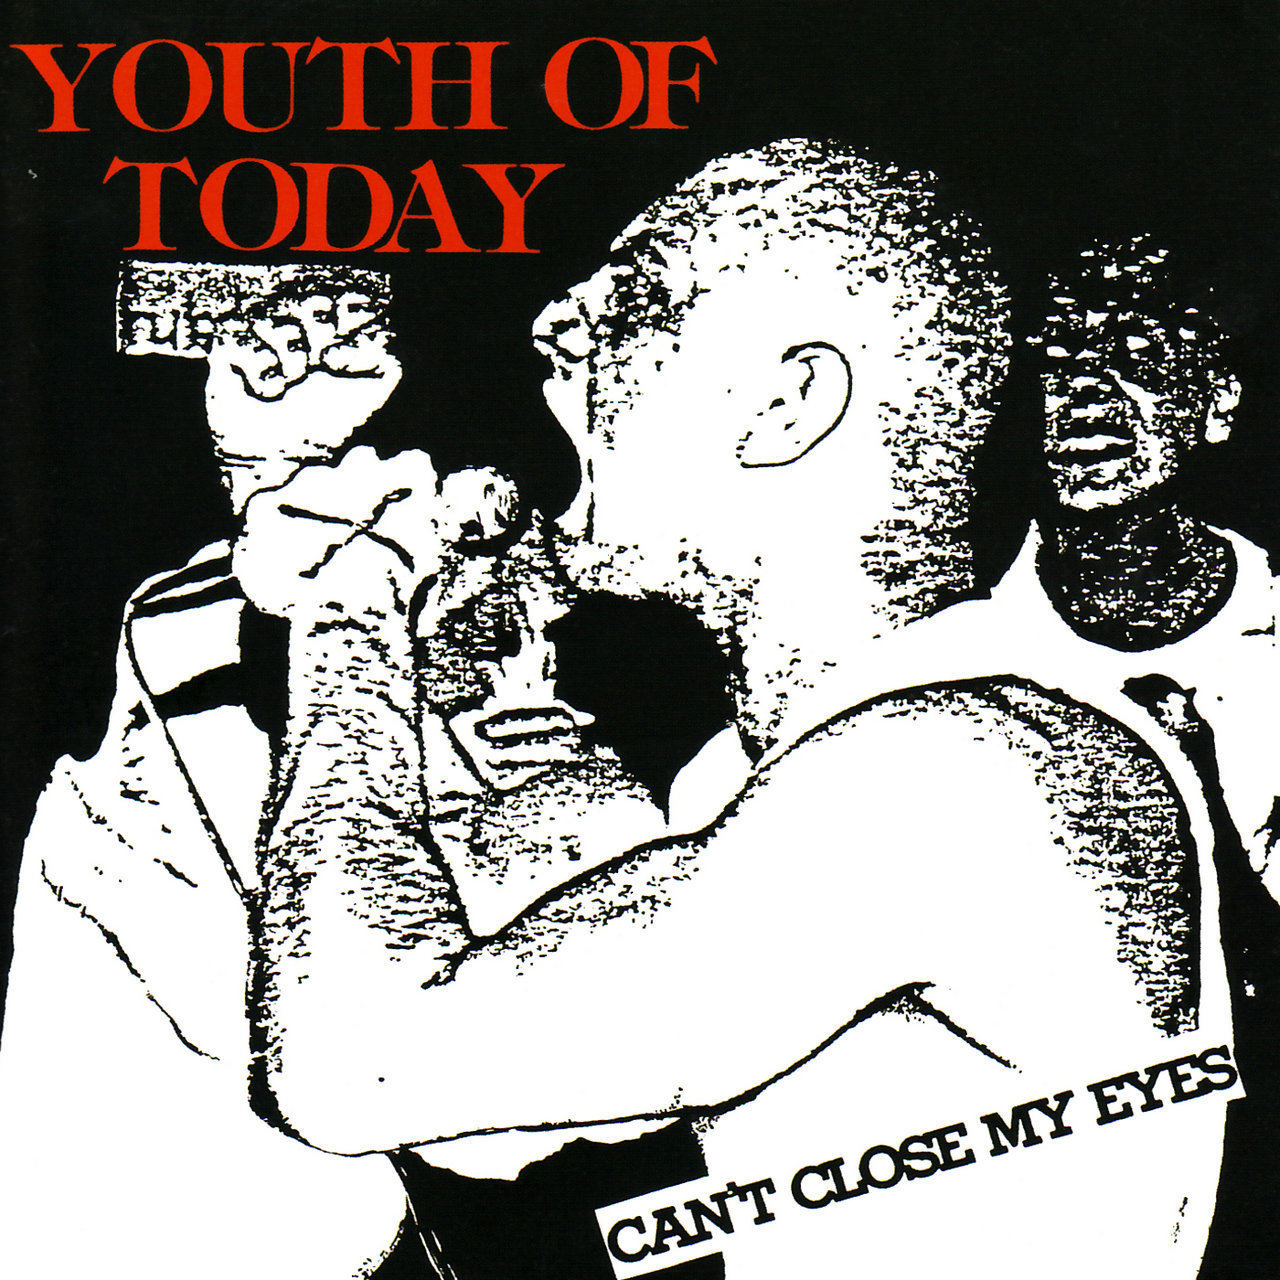 The Daily Orca-All My Records-Youth of Today-Can't Close My Eyes